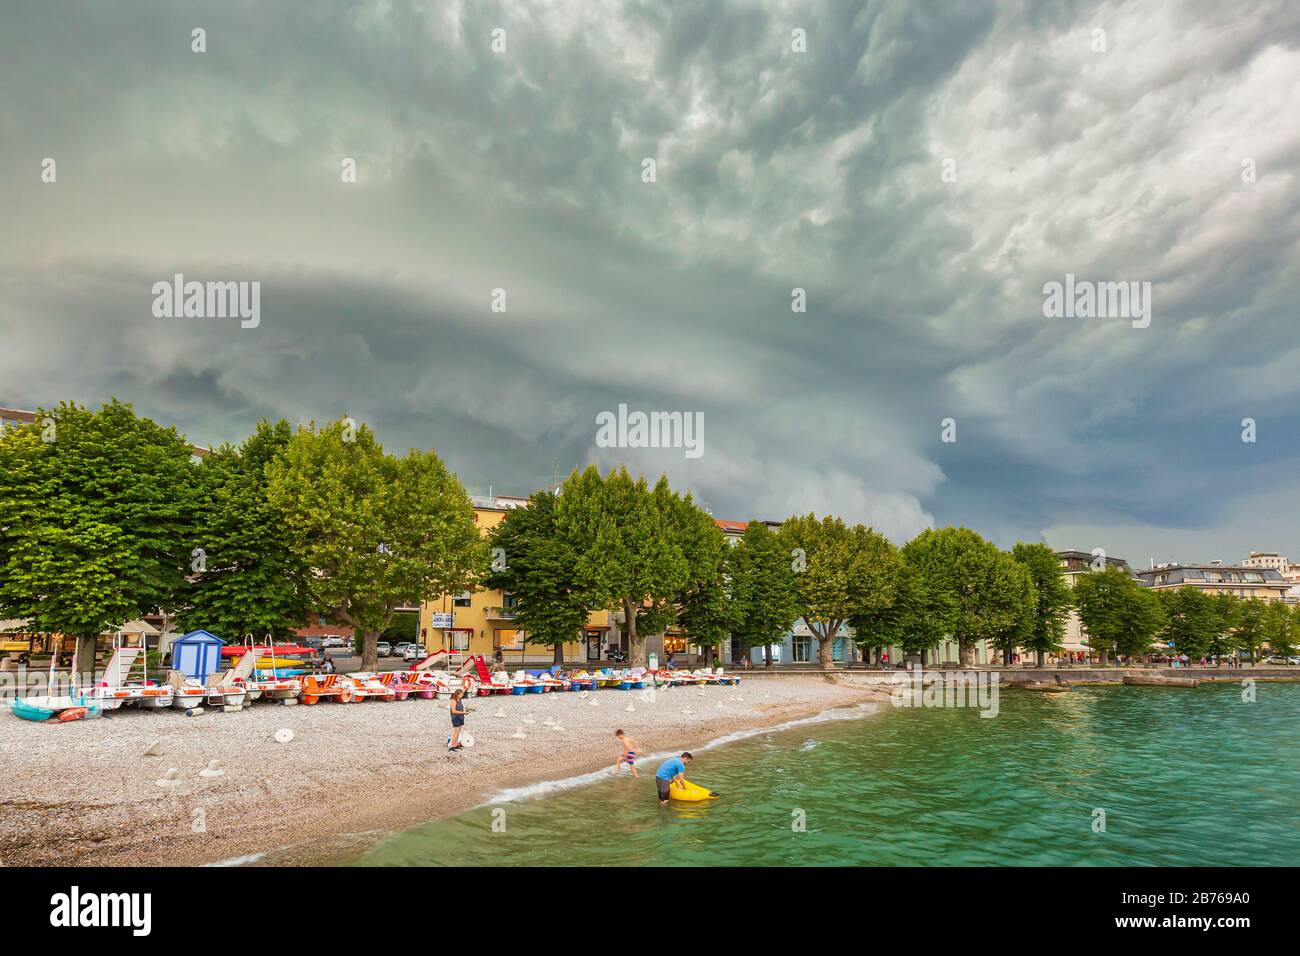 August 12 2019, Desenzano del Garda, Lombardy, Italy - Severe weather with thunderstorms, heavy rain showers and strong winds develop rapidly at Desen Stock Photo